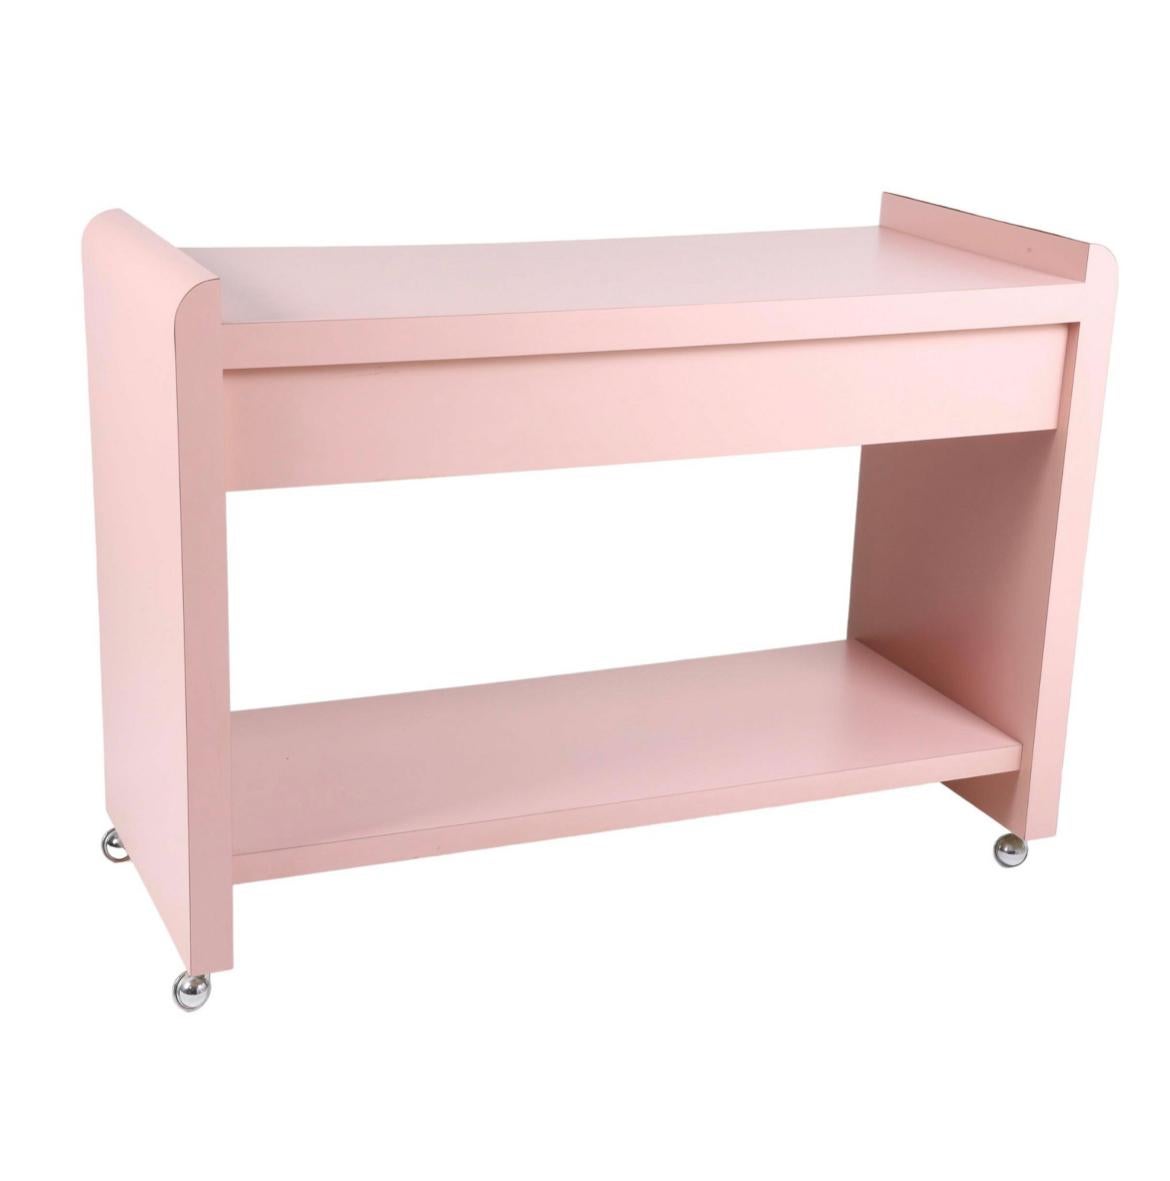 Awesome Postmodern midcentury Pink Bar Cart style of Memphis Milano. Very cool custom built unit with pink laminate with 2
mirror front drawers on chrome casters. Unique design large is Size great piece for a postmodern designed home. Made in USA,